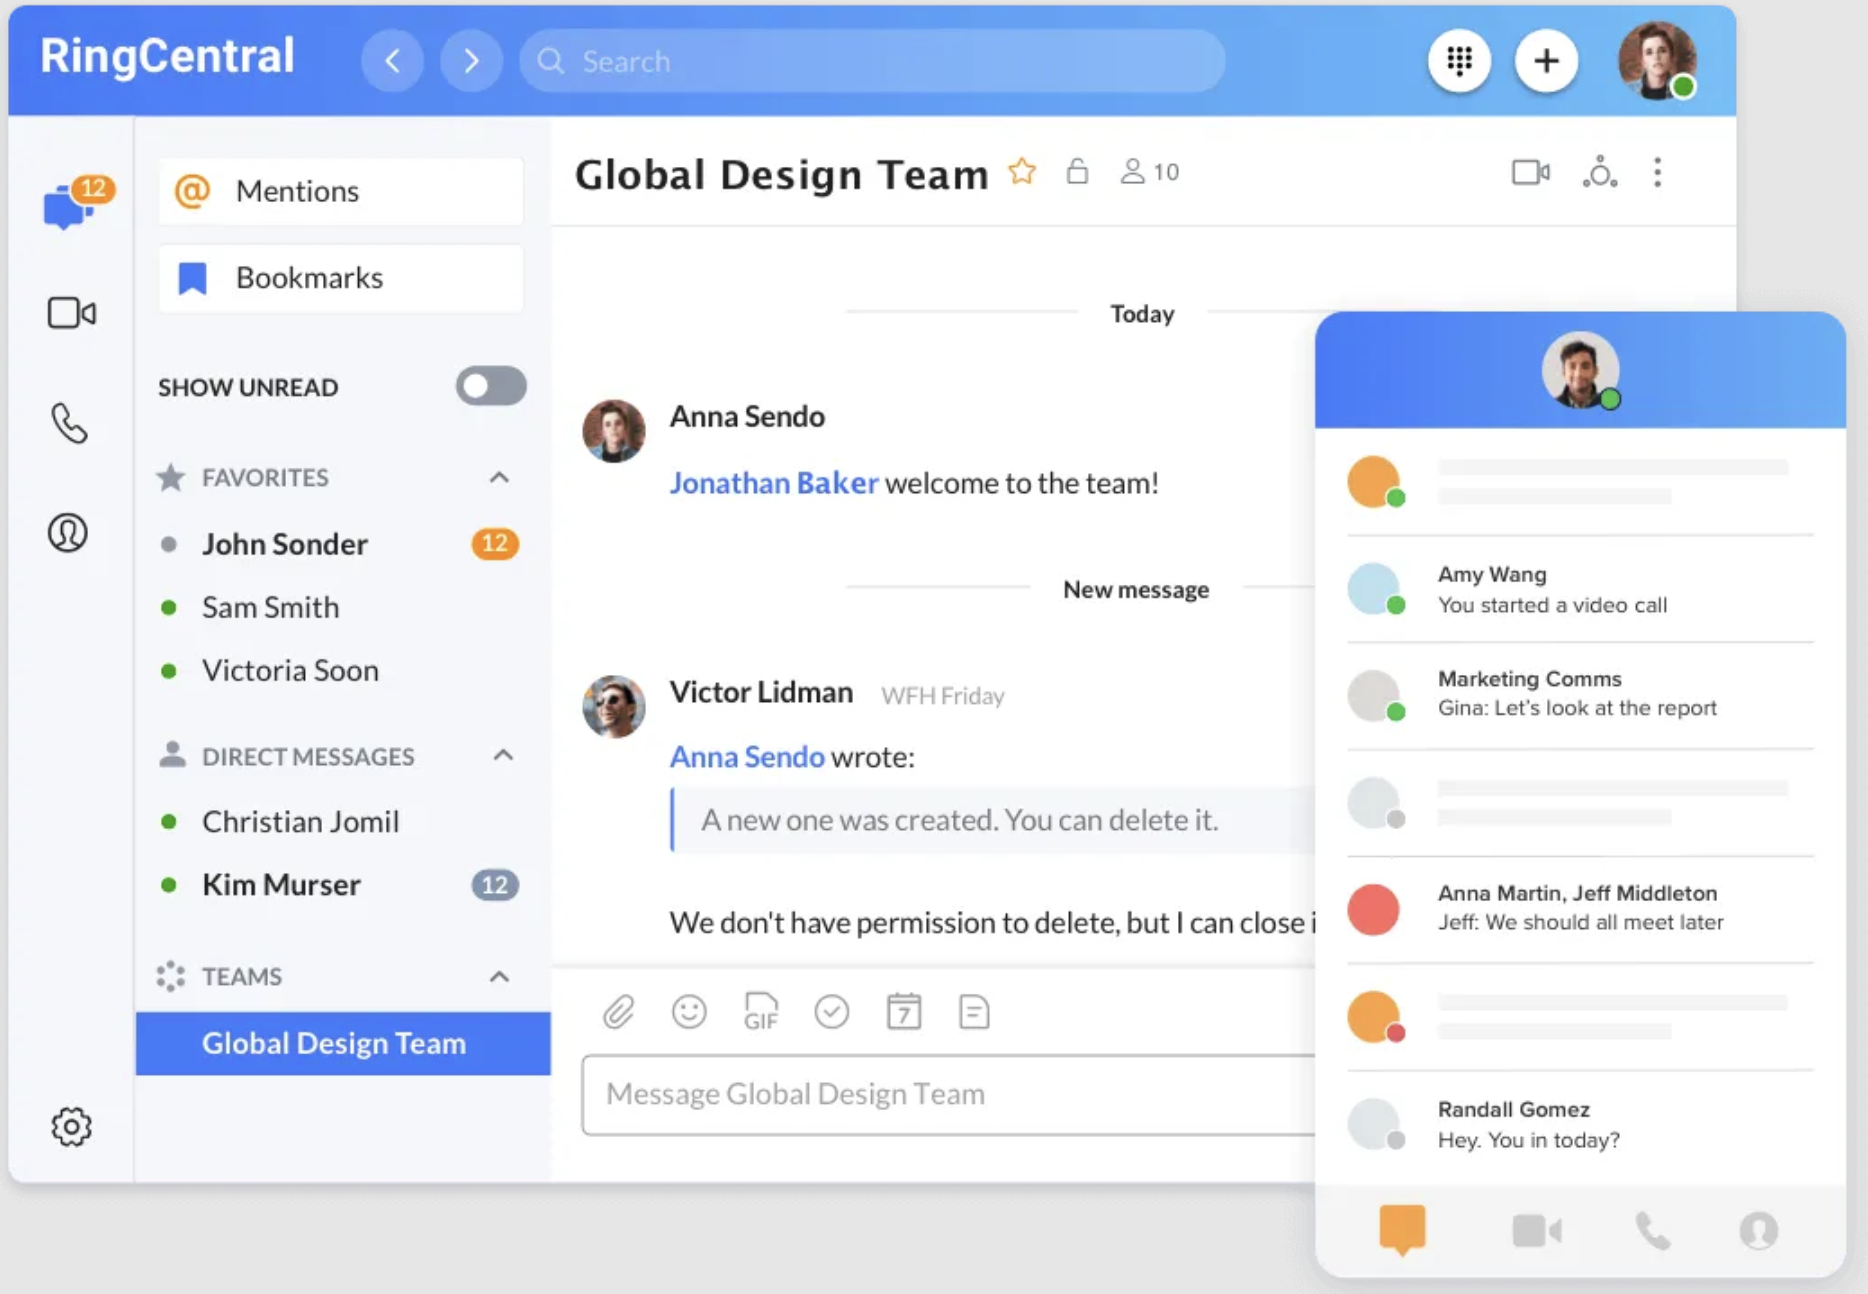 RingCentral MVP Messaging & Chat Capabilities